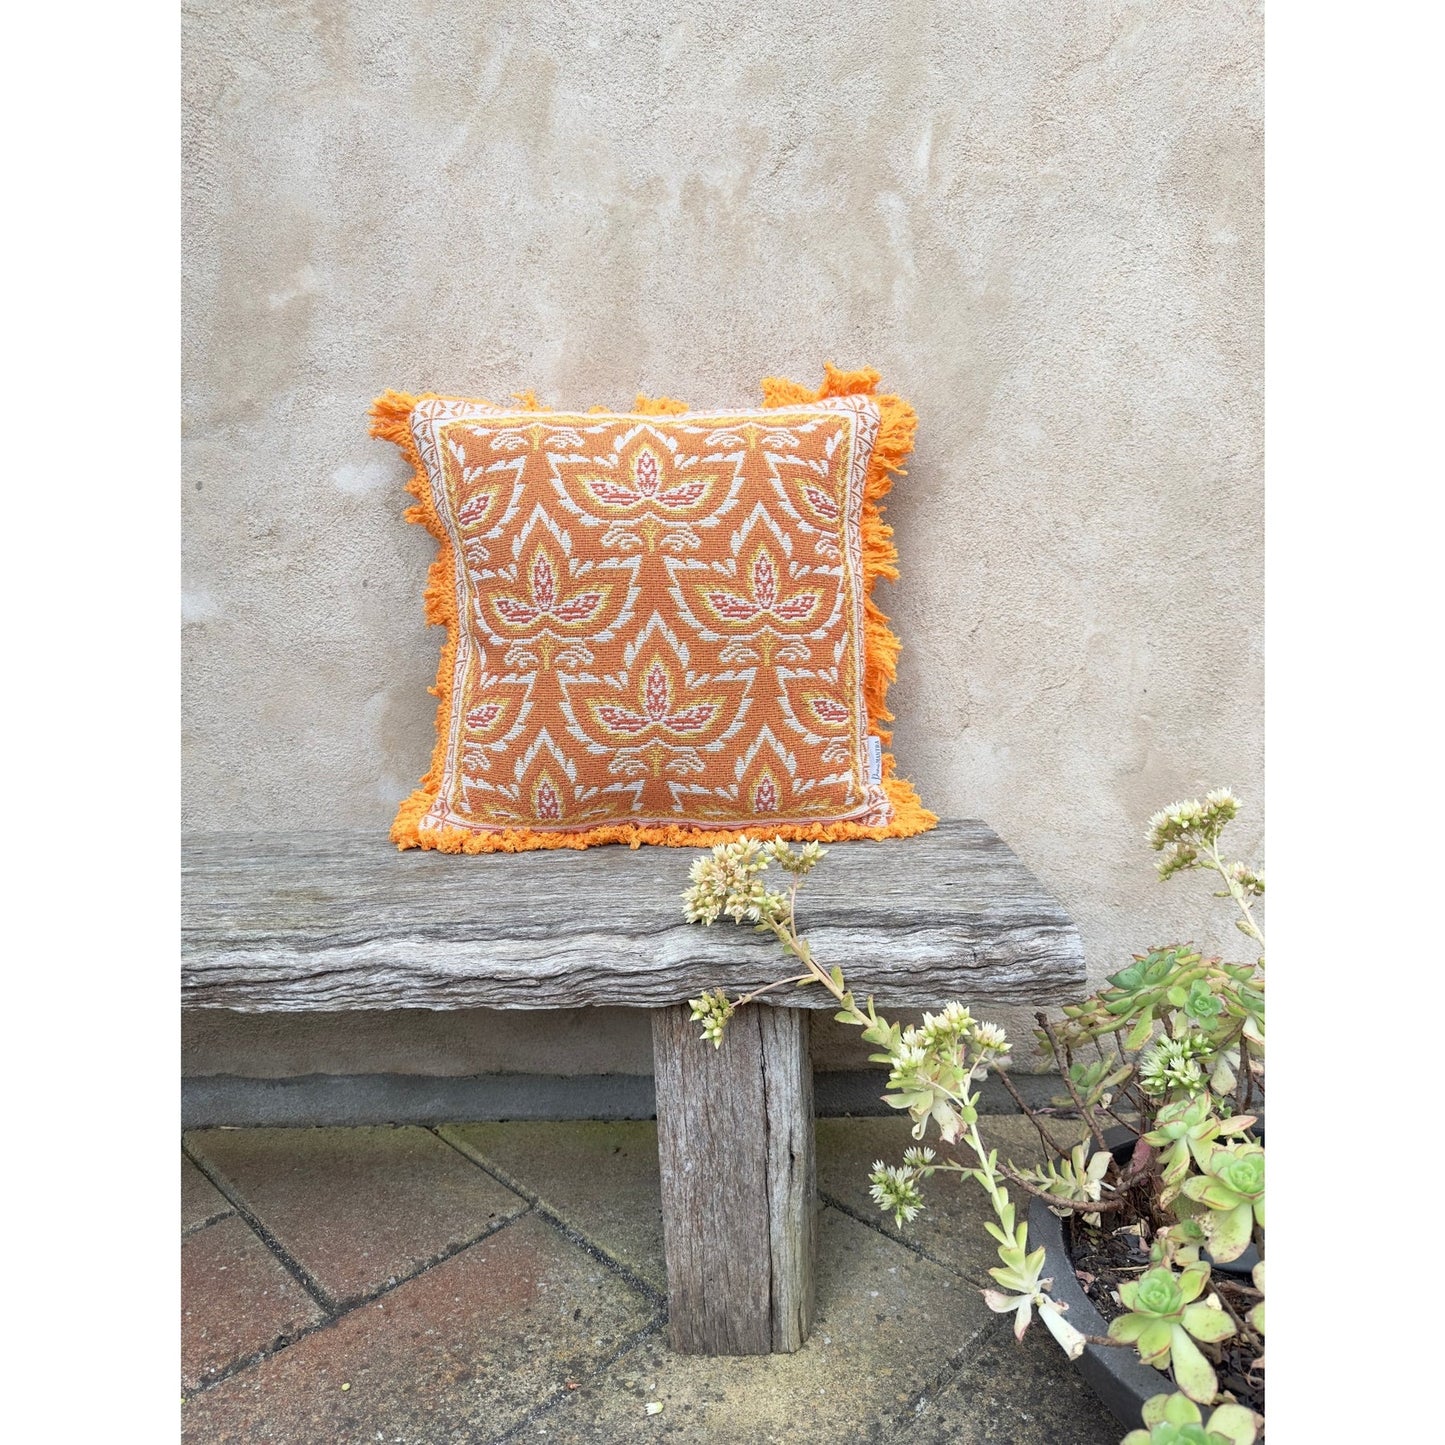 Picnic Mantra - Kaia Scatter Cushion